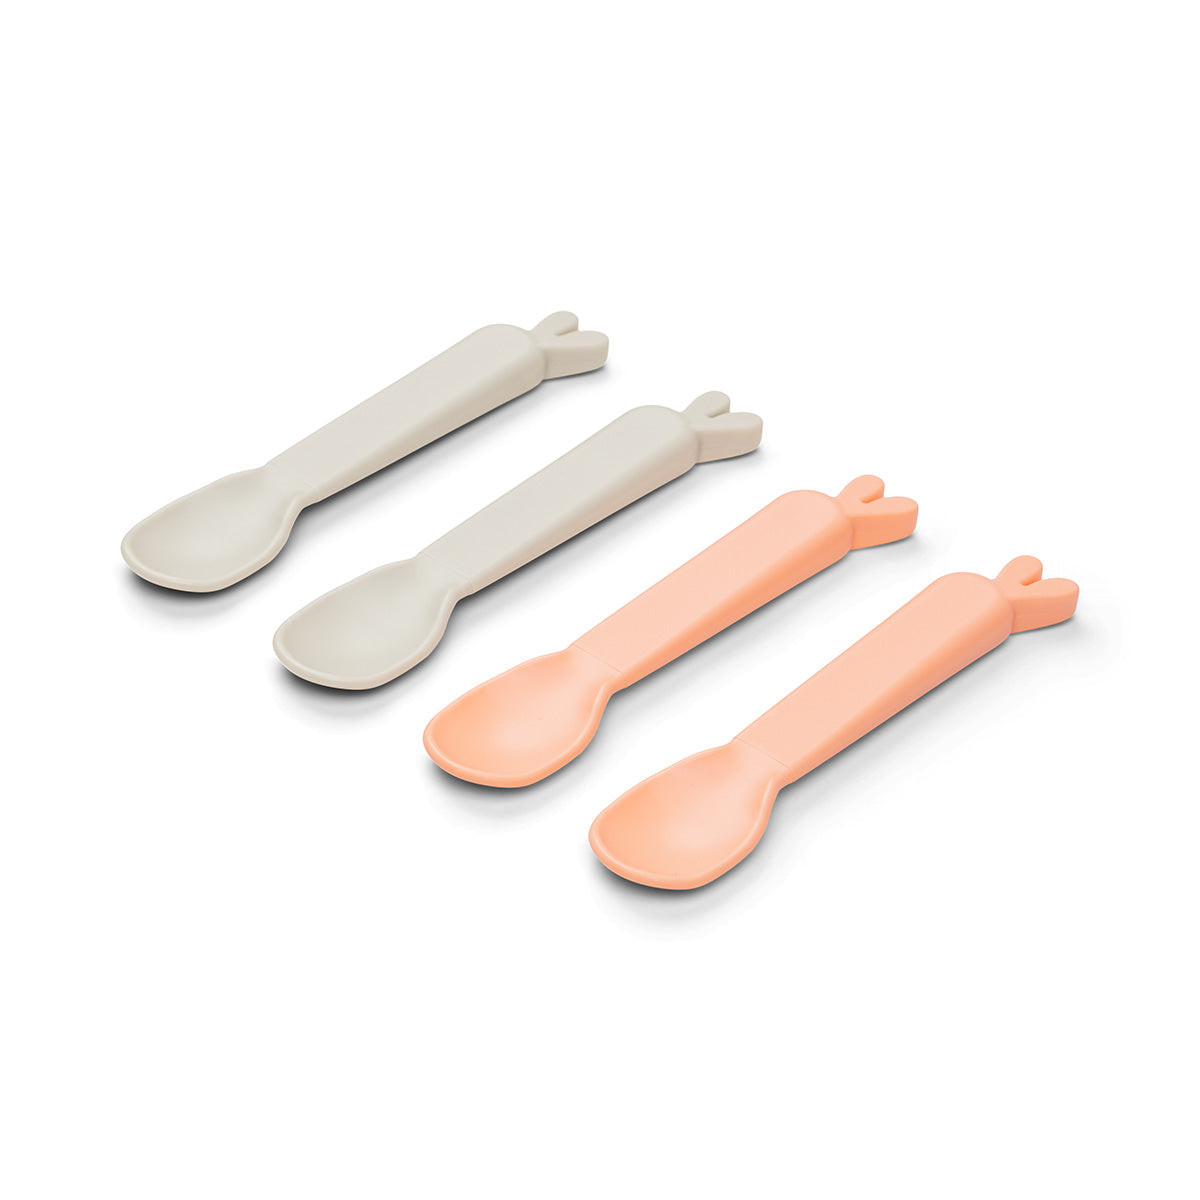 Kiddish spoon 4-pack - Lalee - Sand/Coral